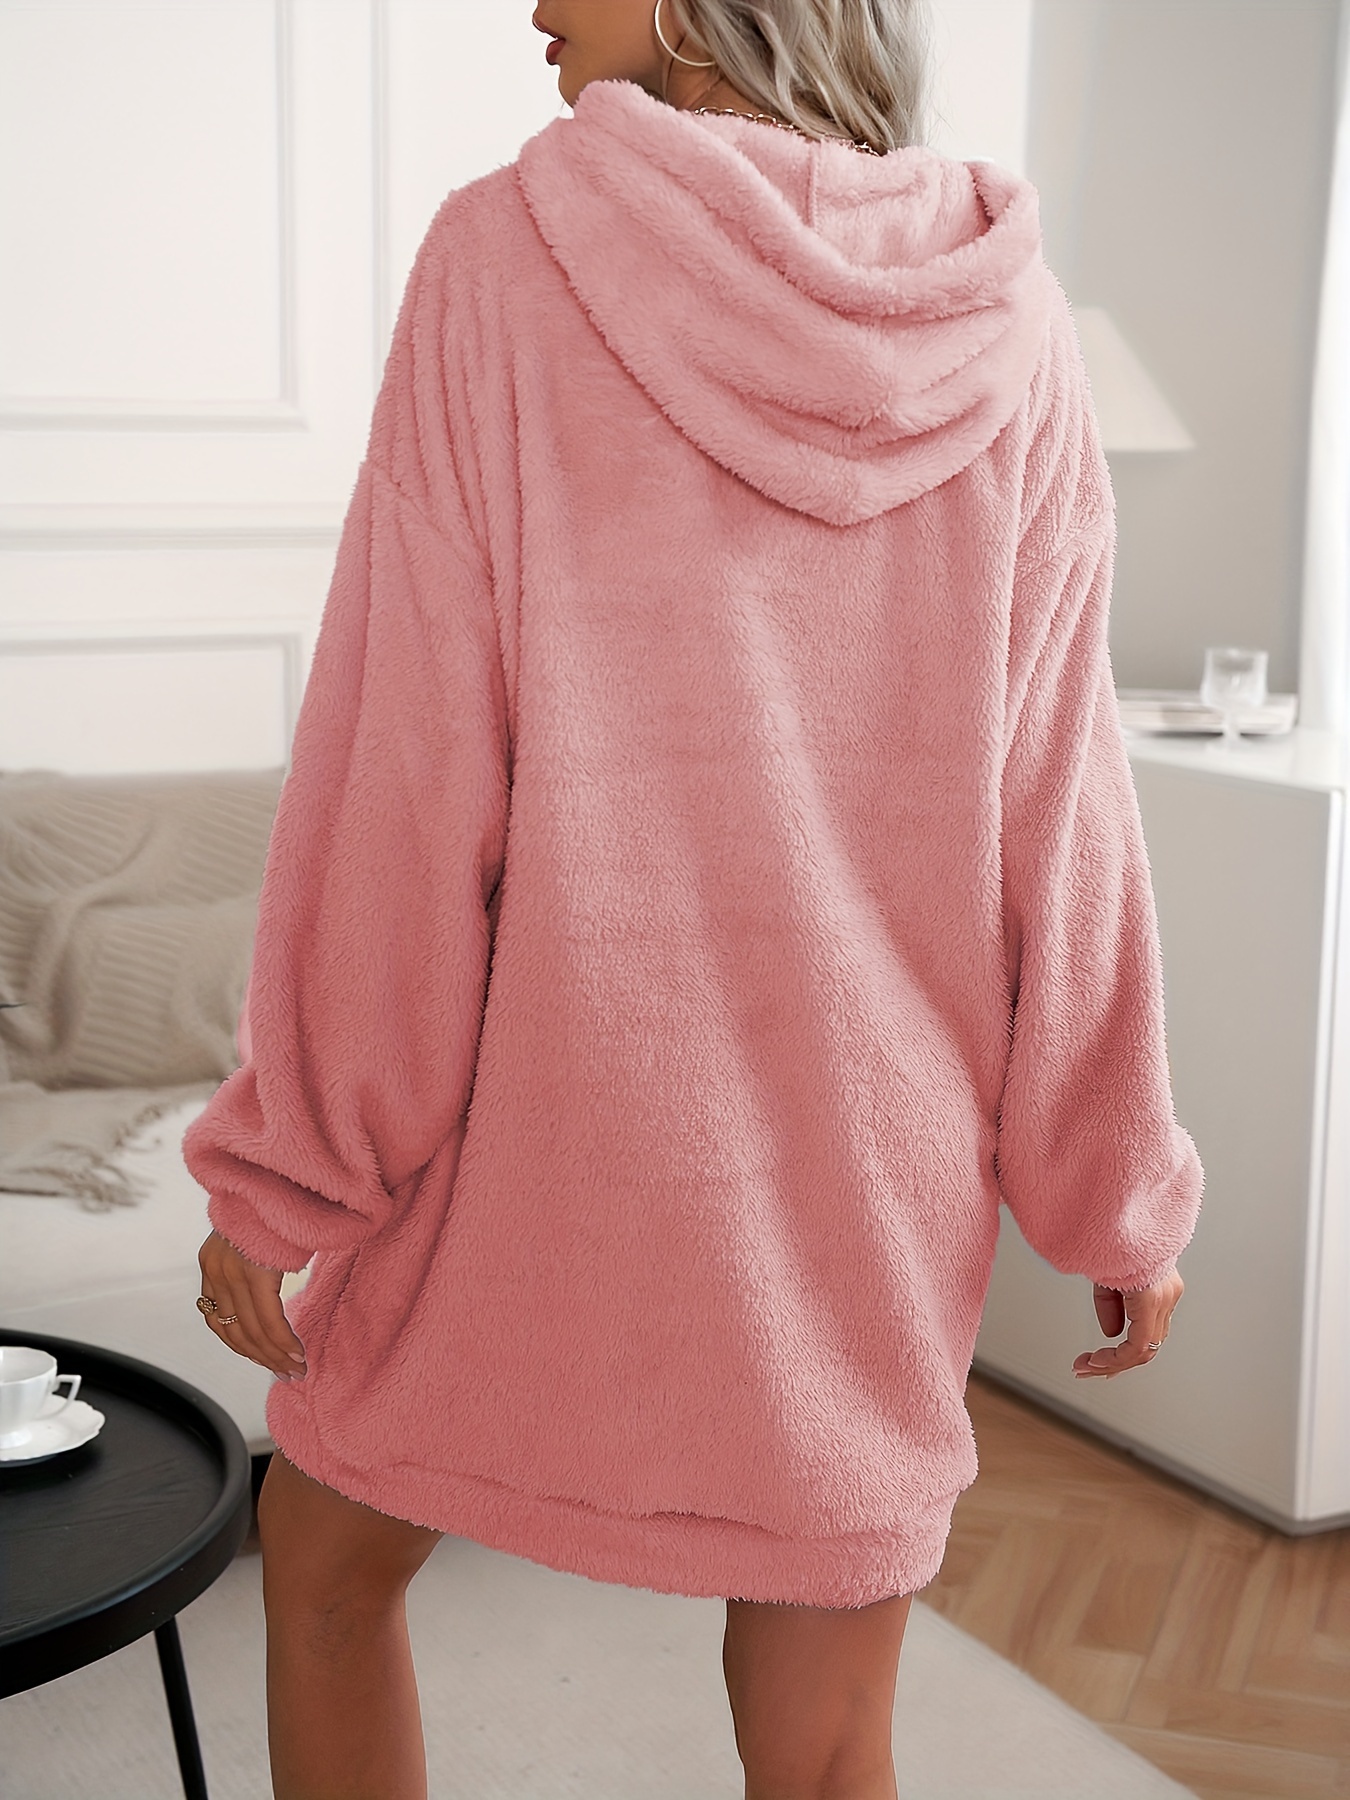 hooded teddy dress casual solid long sleeve warm dress womens clothing details 45